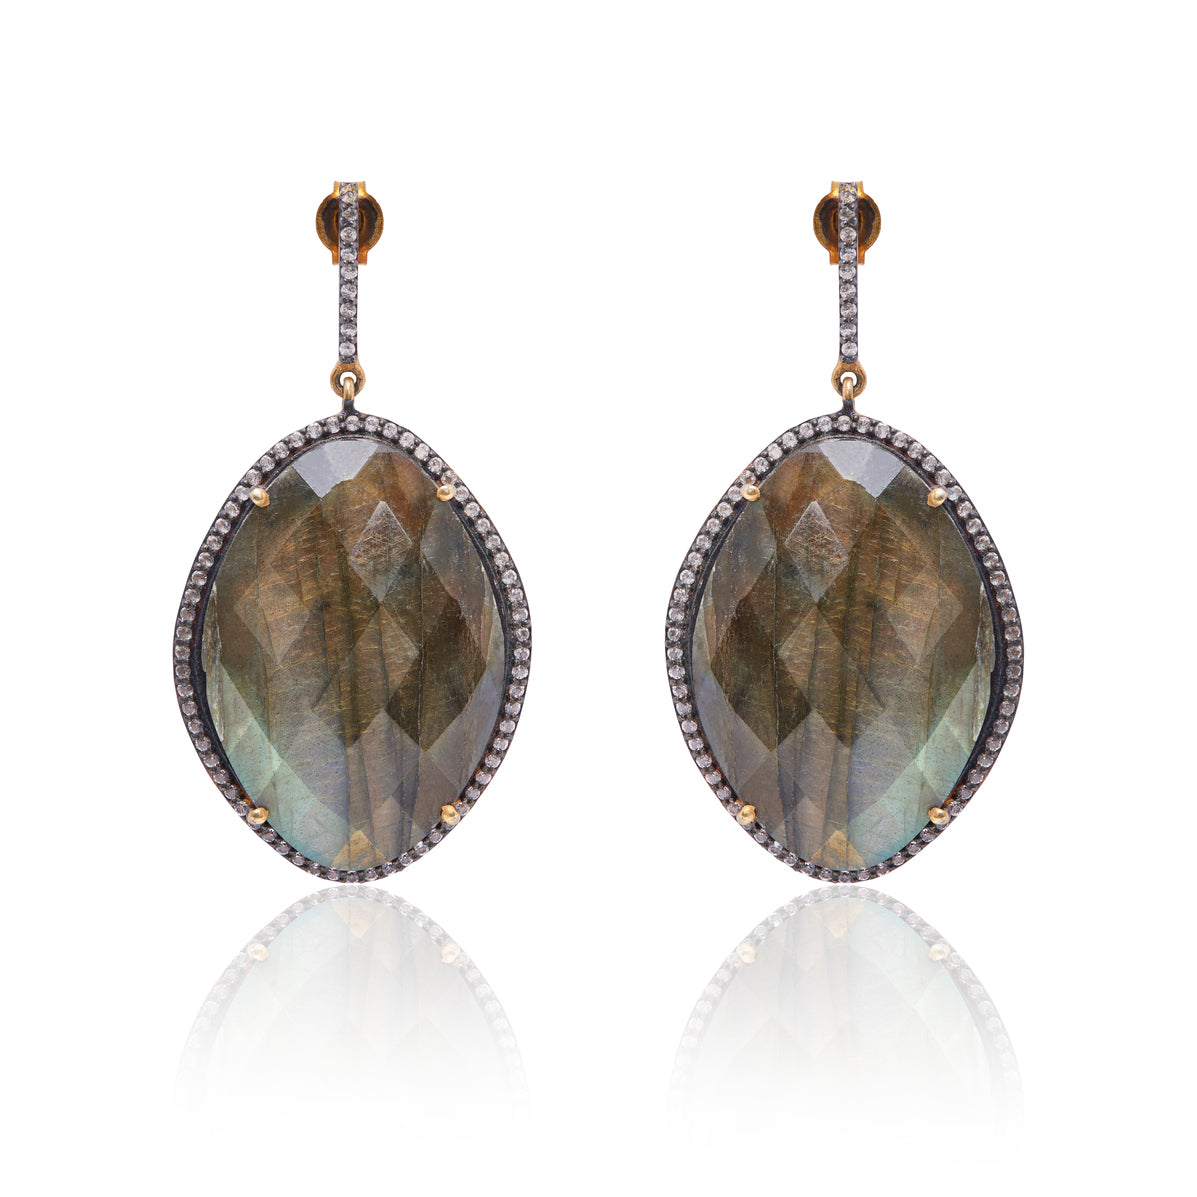 Faceted Labradorite Earring with White Topaz made in sterling silver